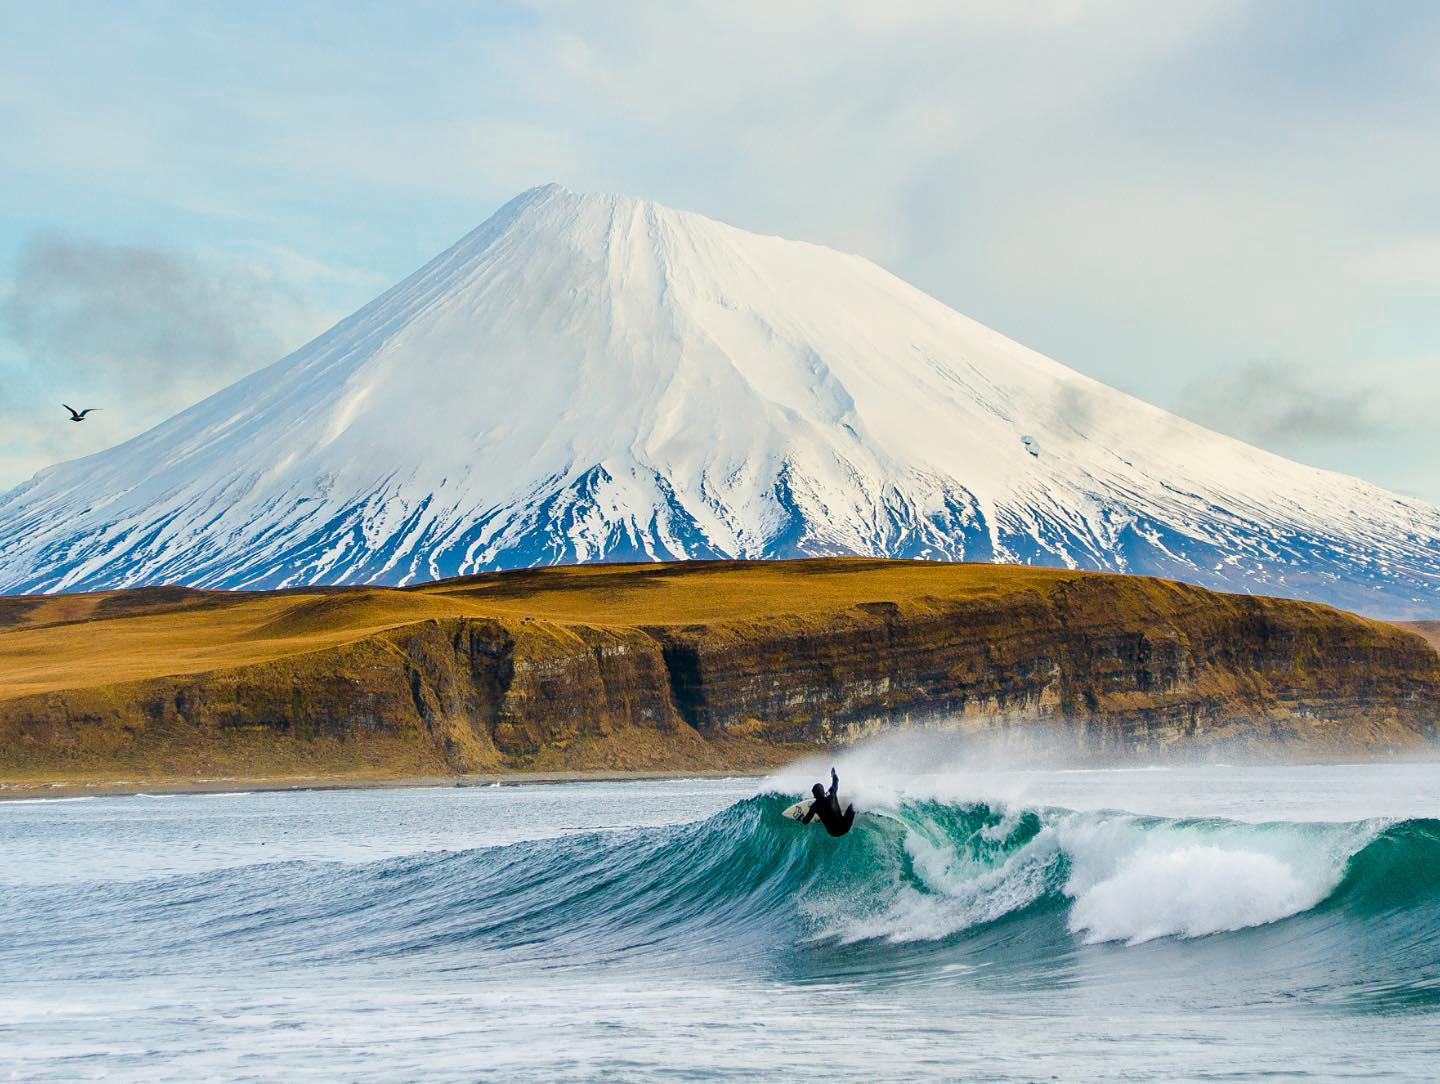 image  1 ChrisBurkard - There are few joys greater as a photographer than seeing your greatest work printed a